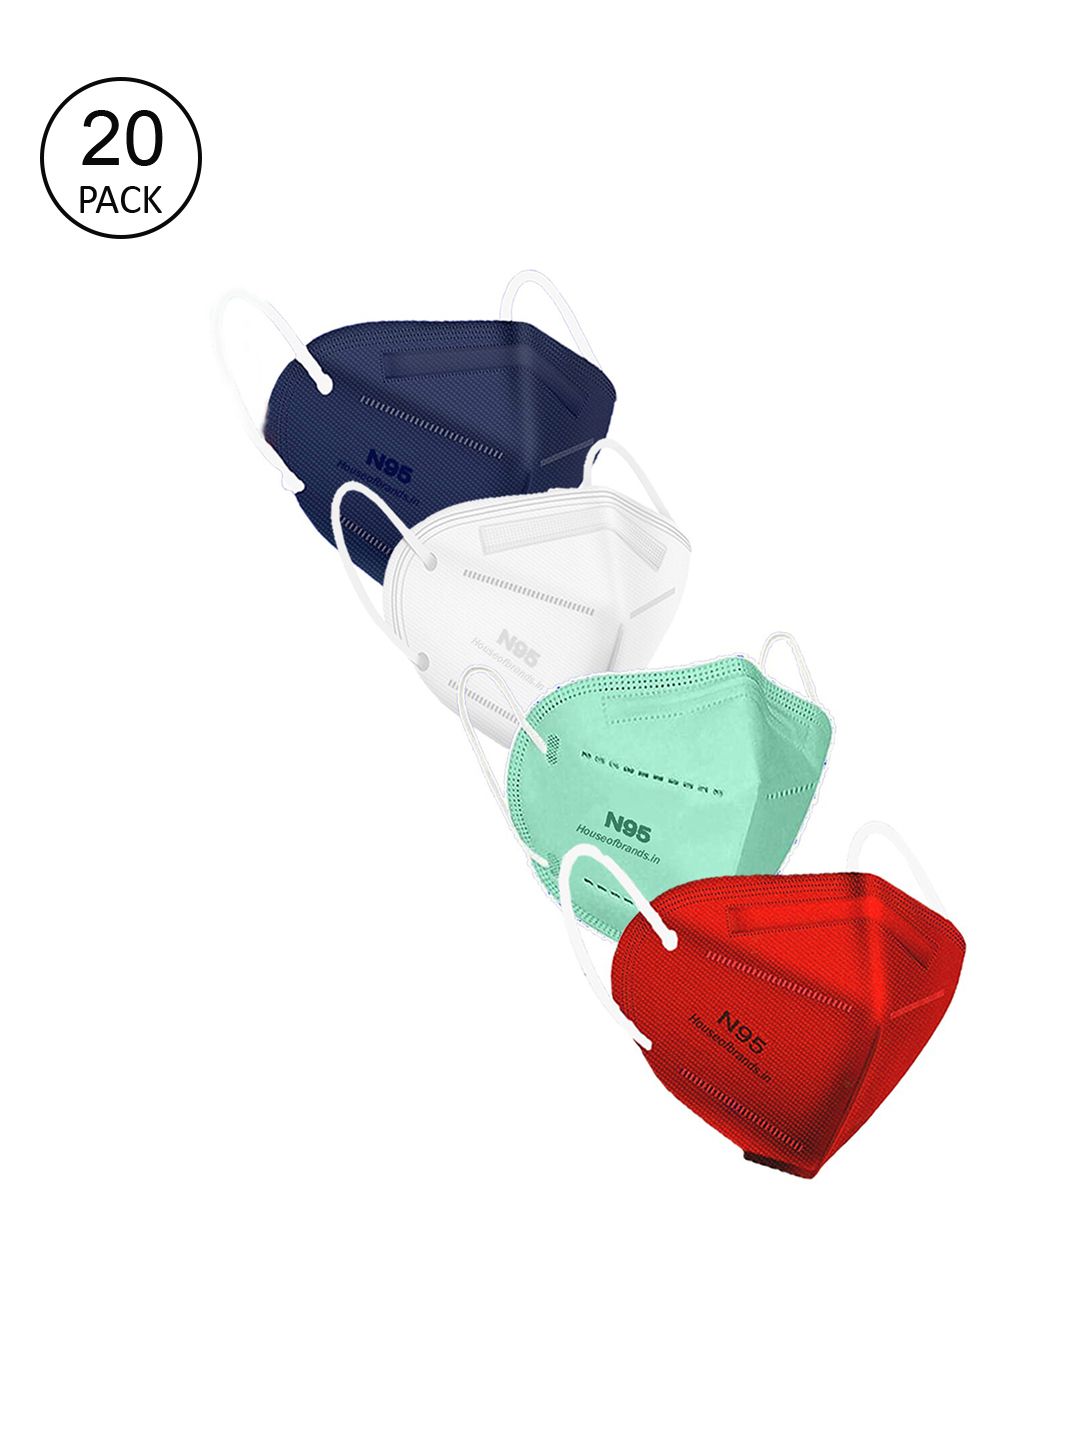 Swiss Design Pack of 20 Assorted 5-Ply Anti-Pollution N95 Masks Price in India